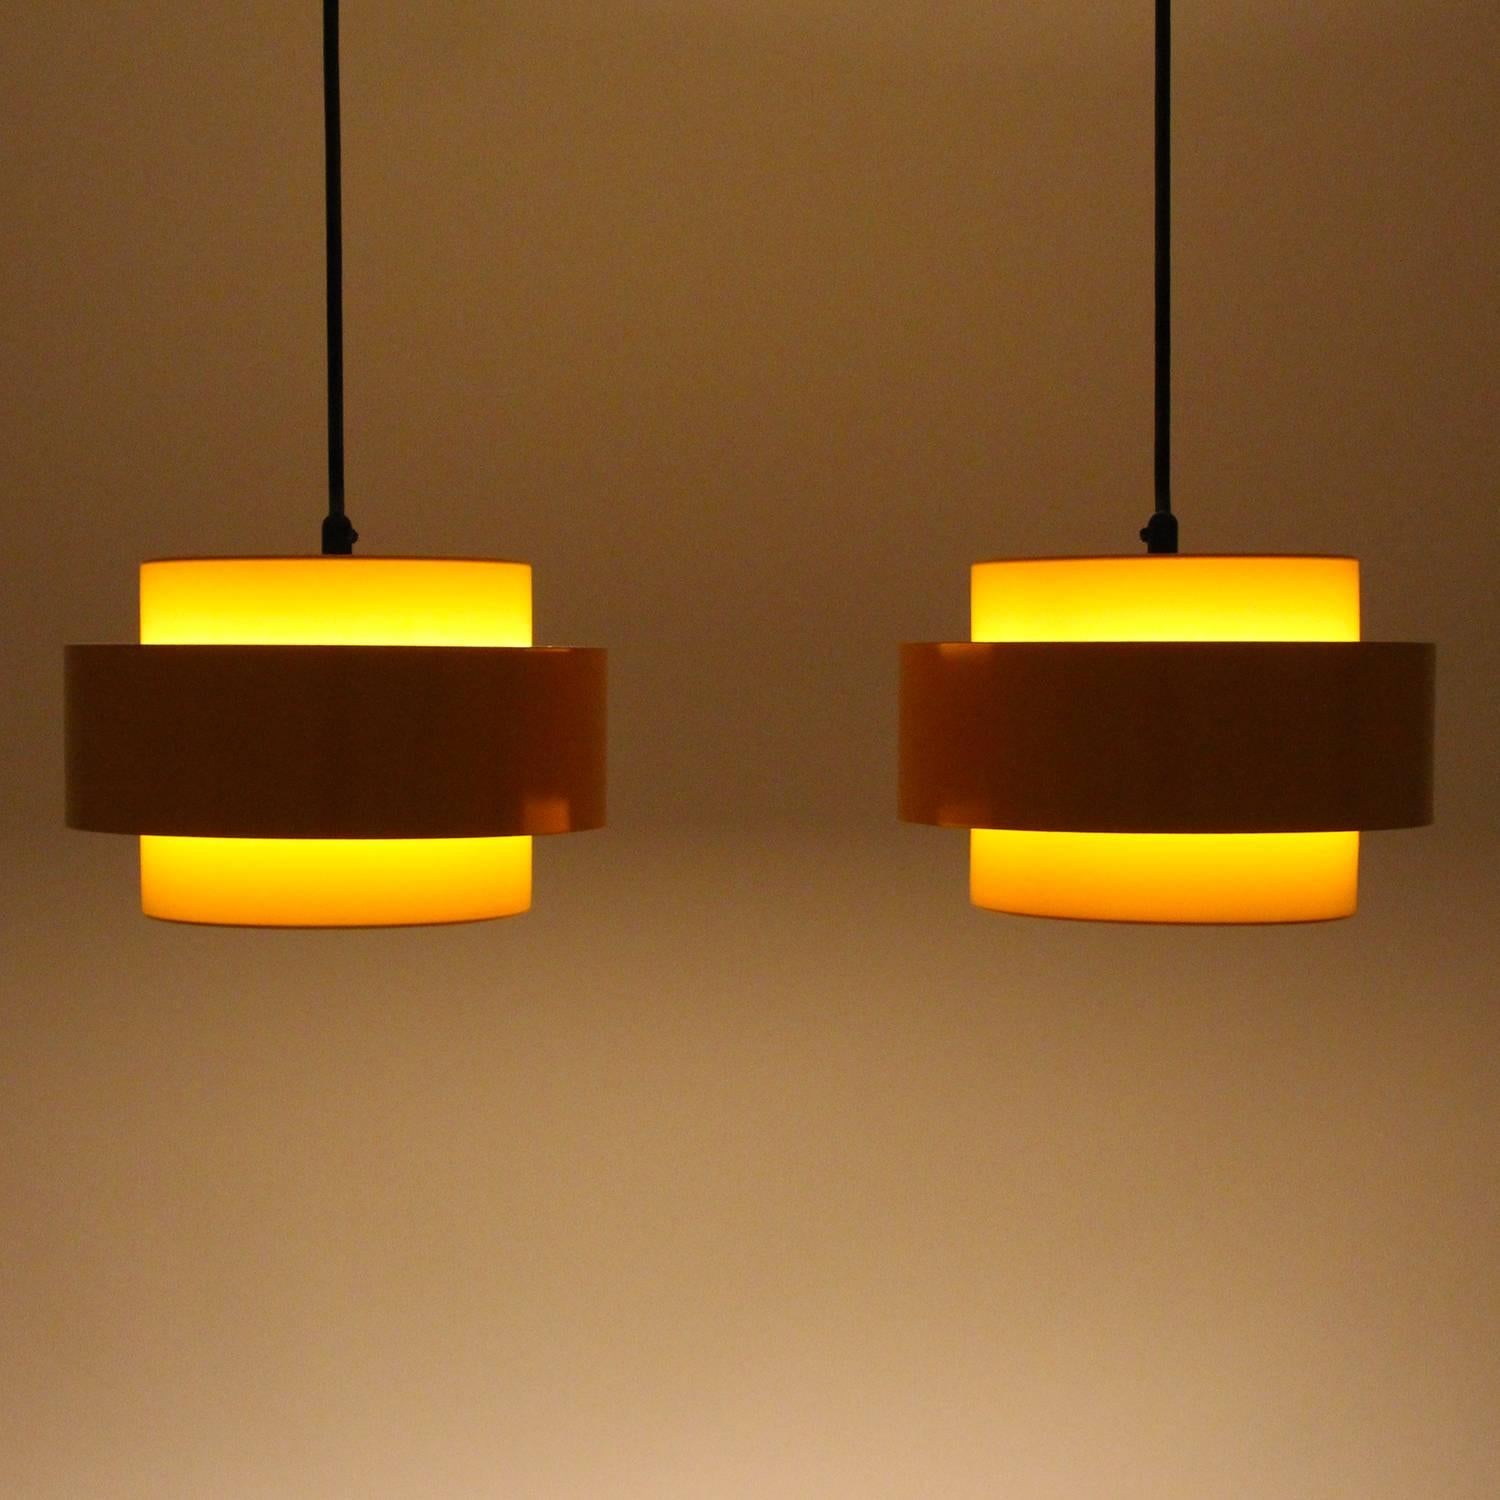 JUNO - yellow pendant pair by Jo Hammerborg in 1969 for Fog & Mørup as part of the Rainbow Line - gorgeous pair of sunny yellow space age light in good vintage condition.

Colorful and vibrant pair of space age pendants, each made up of two inner